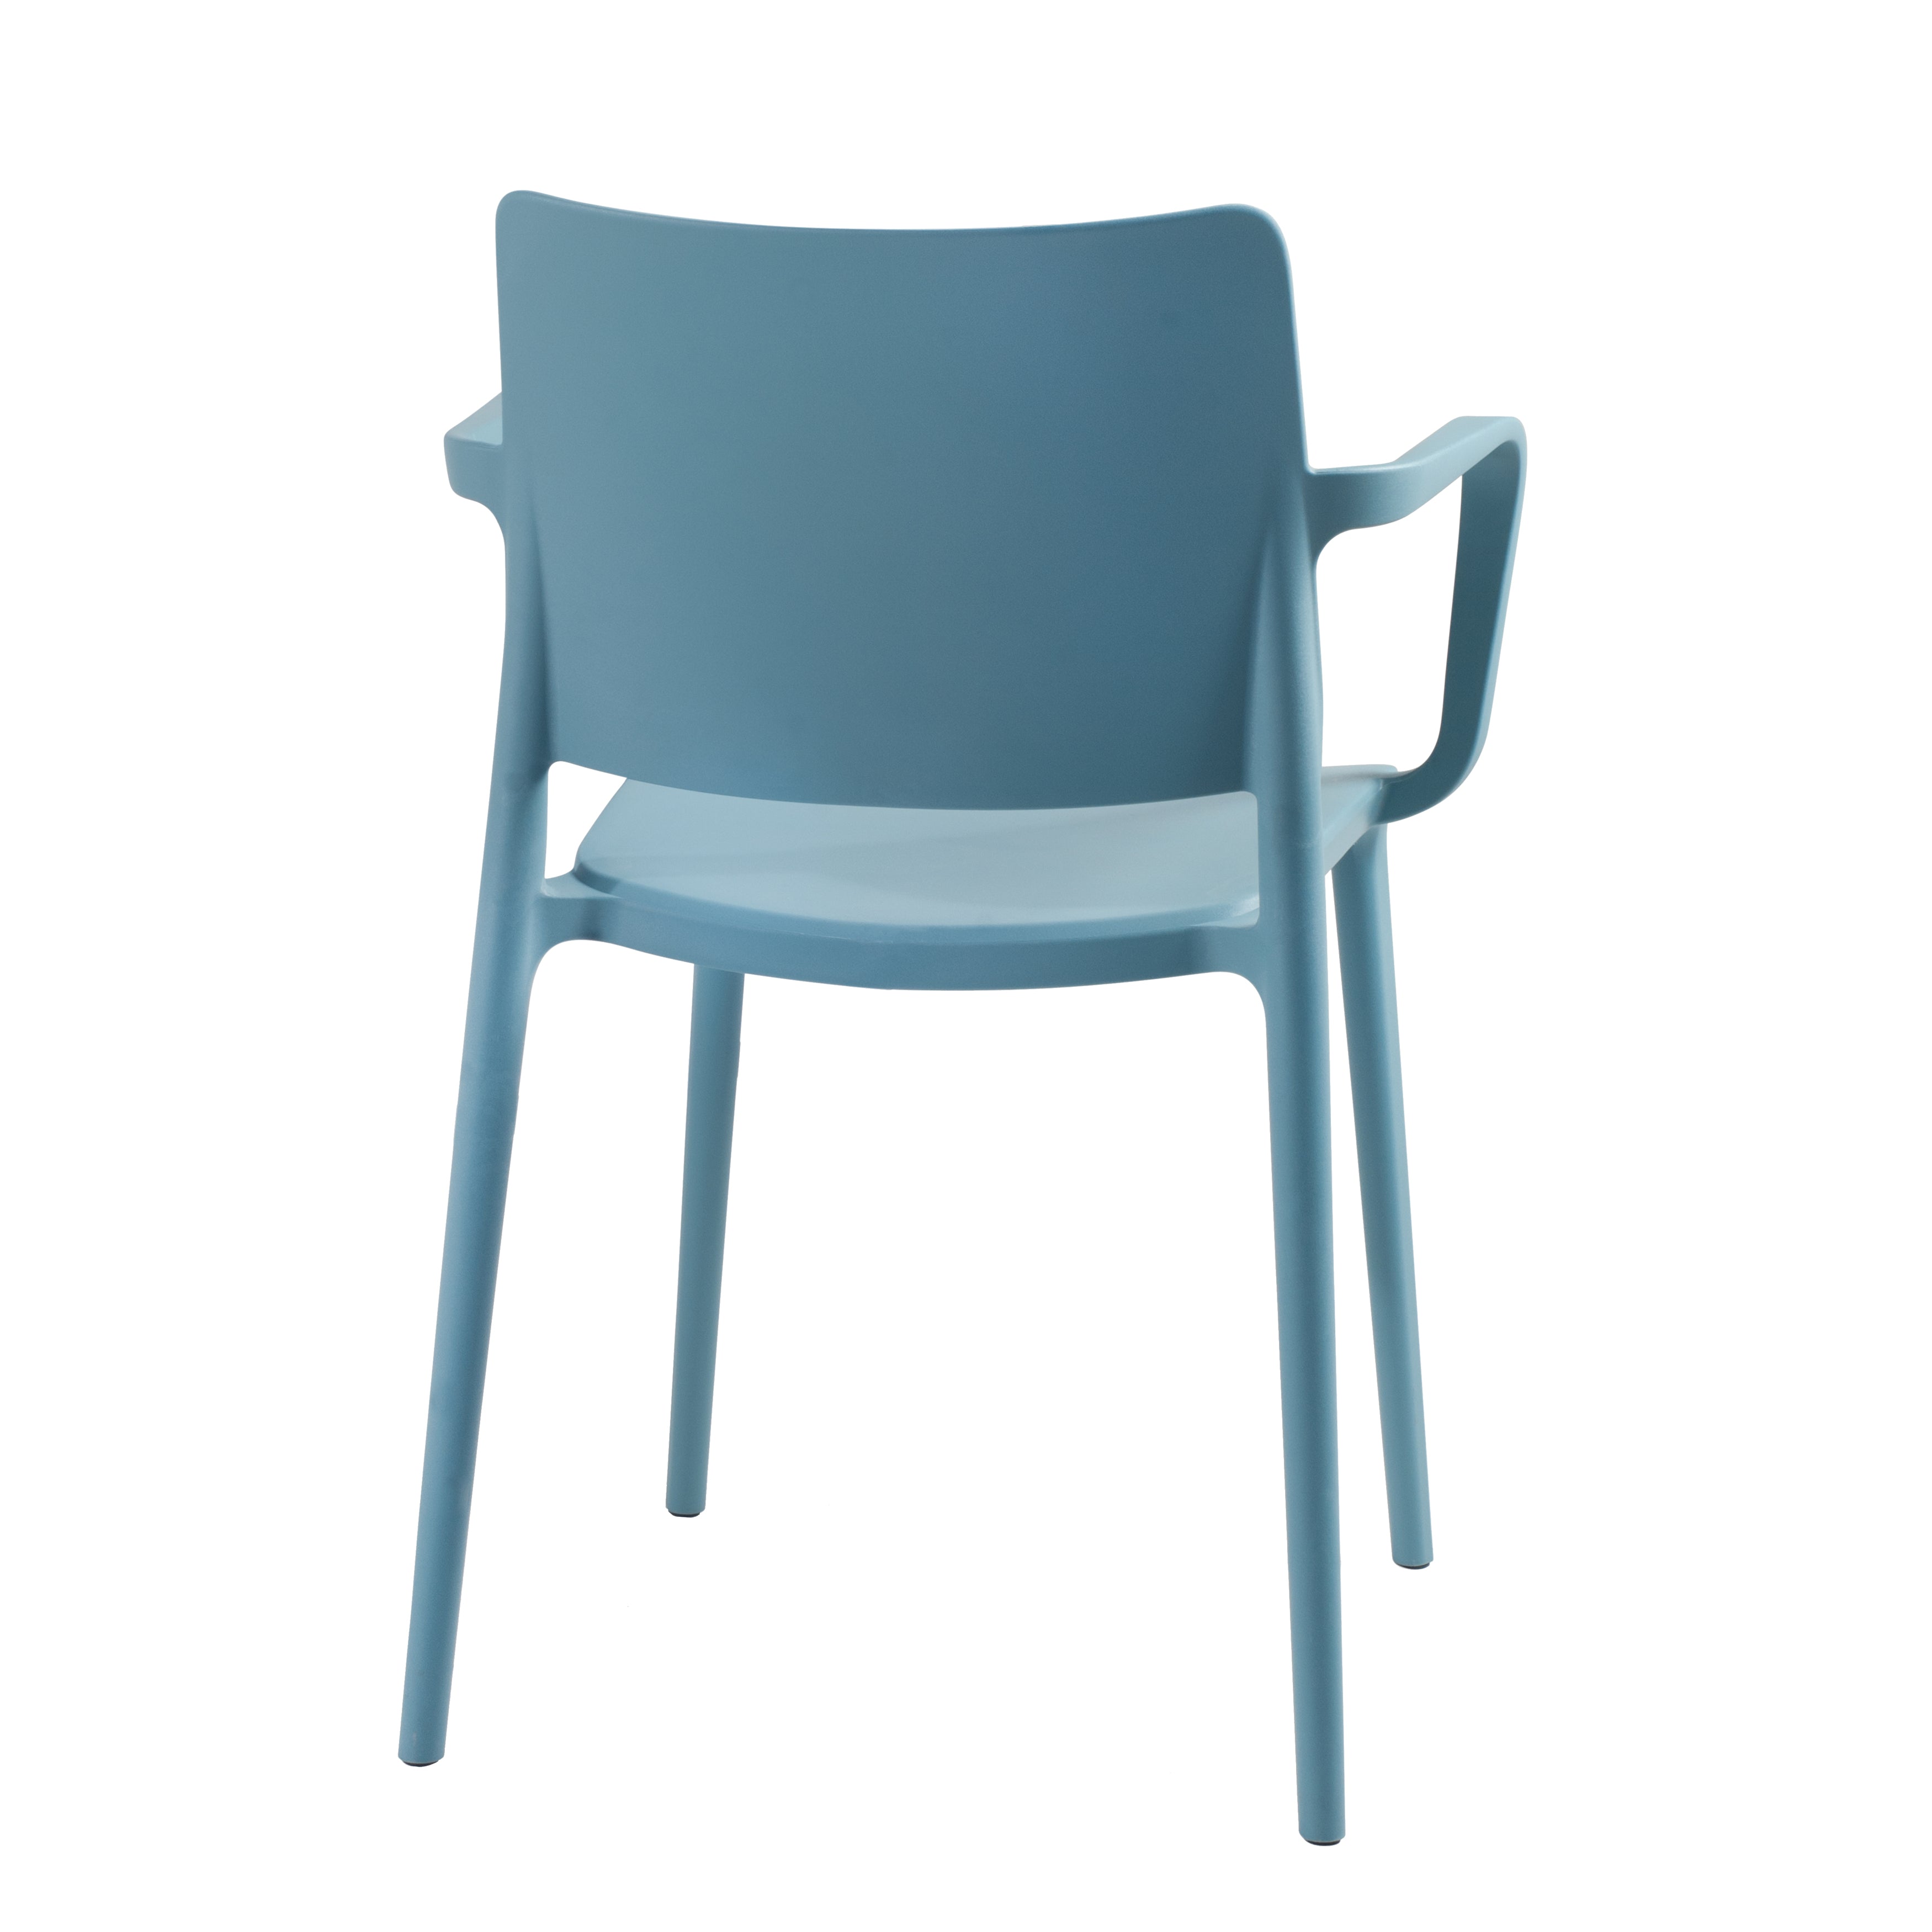 Cleo Arm Patio Dining Chair in Aqua Blue - (Set of 2)